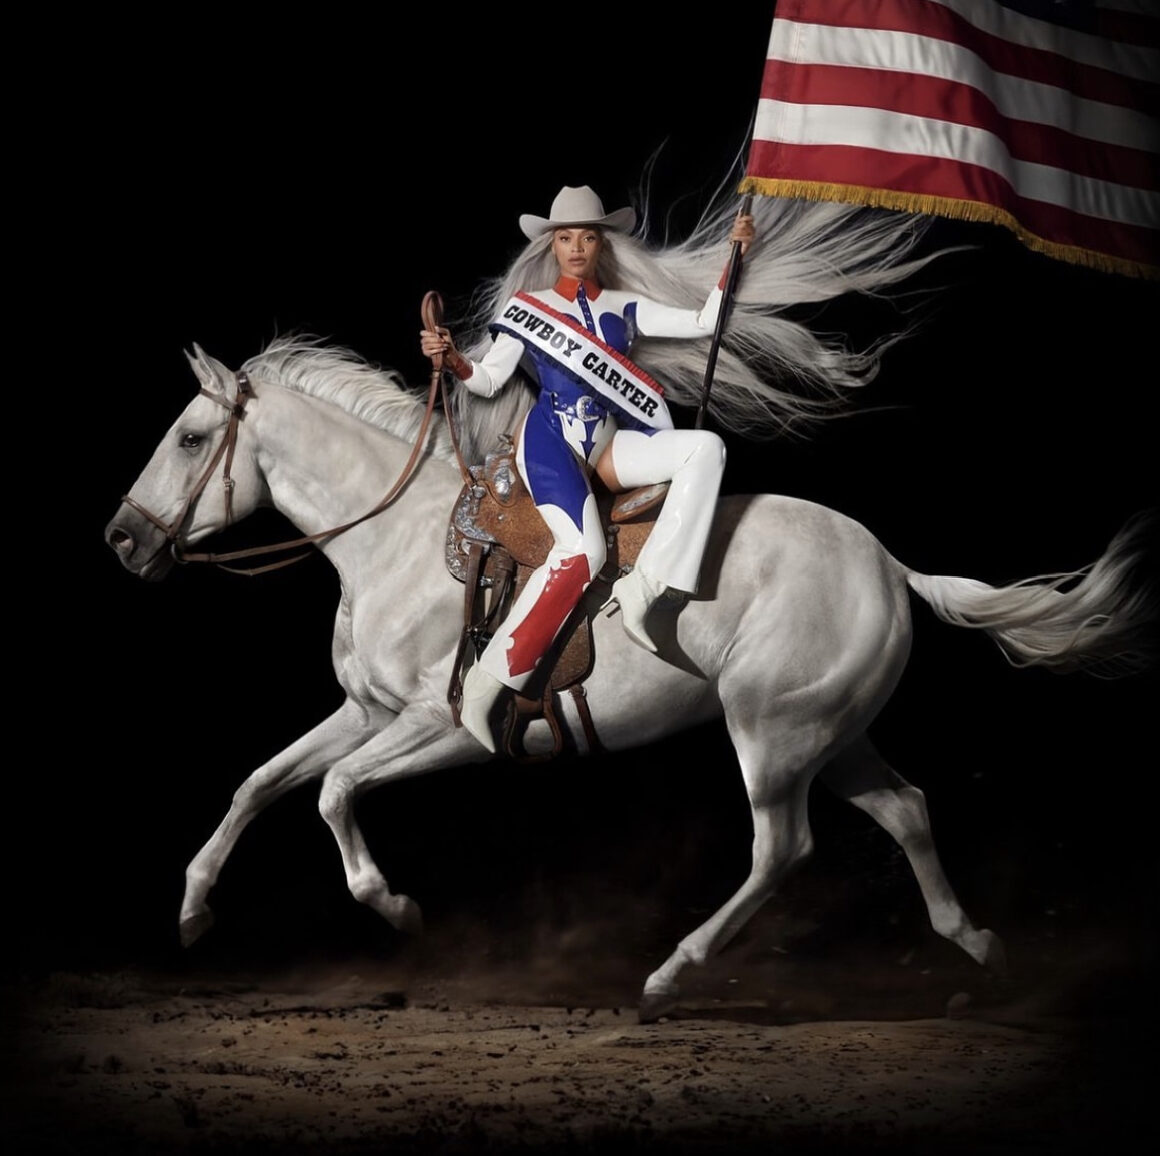 Beyonce Unveiled the Cover of her CowBoy Carter album in a Patriotic Latex Cowboy suit